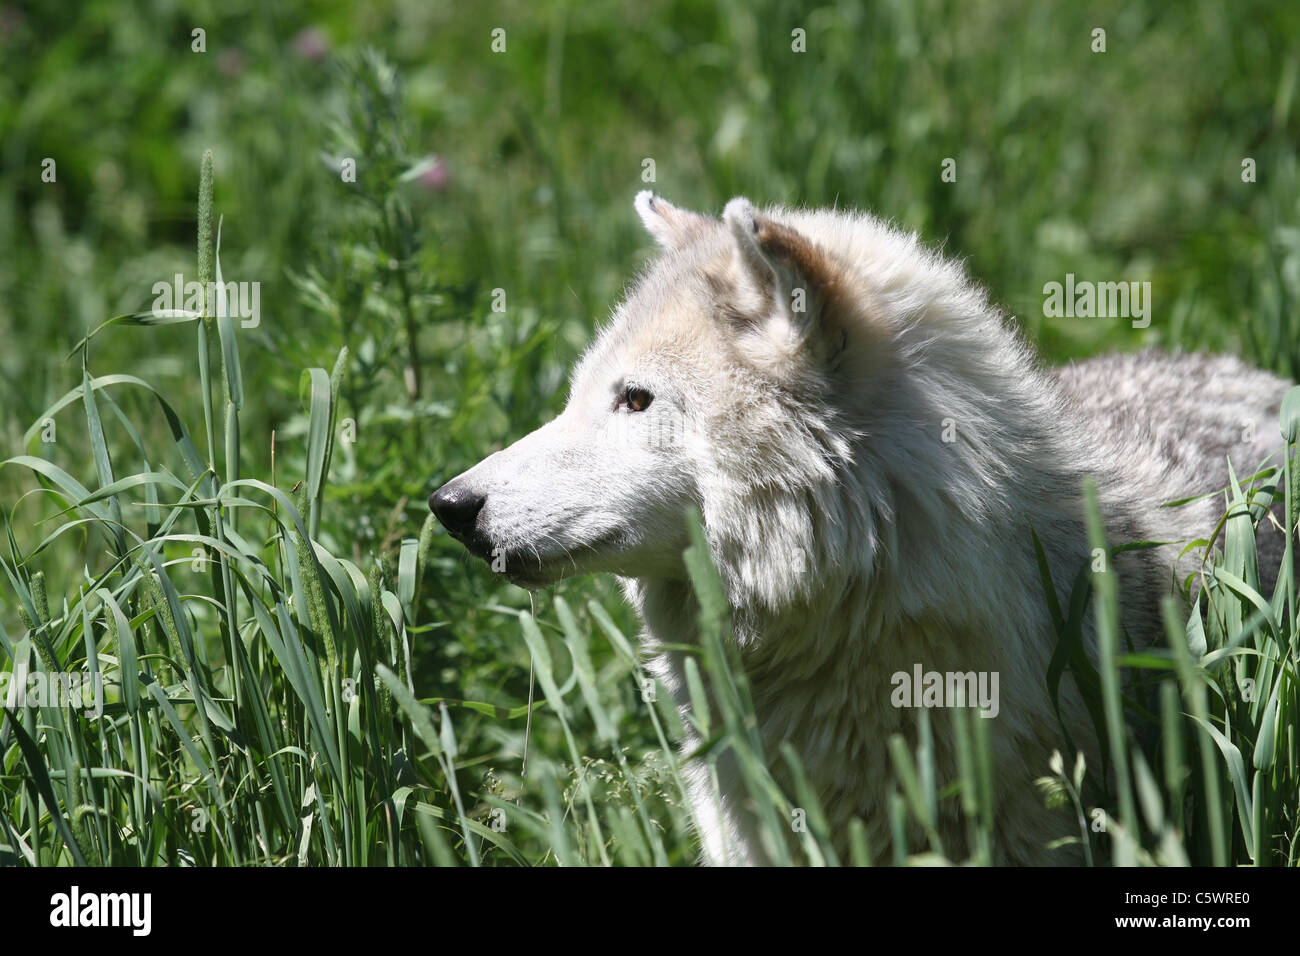 Gray Wolf in a grassy field Stock Photo